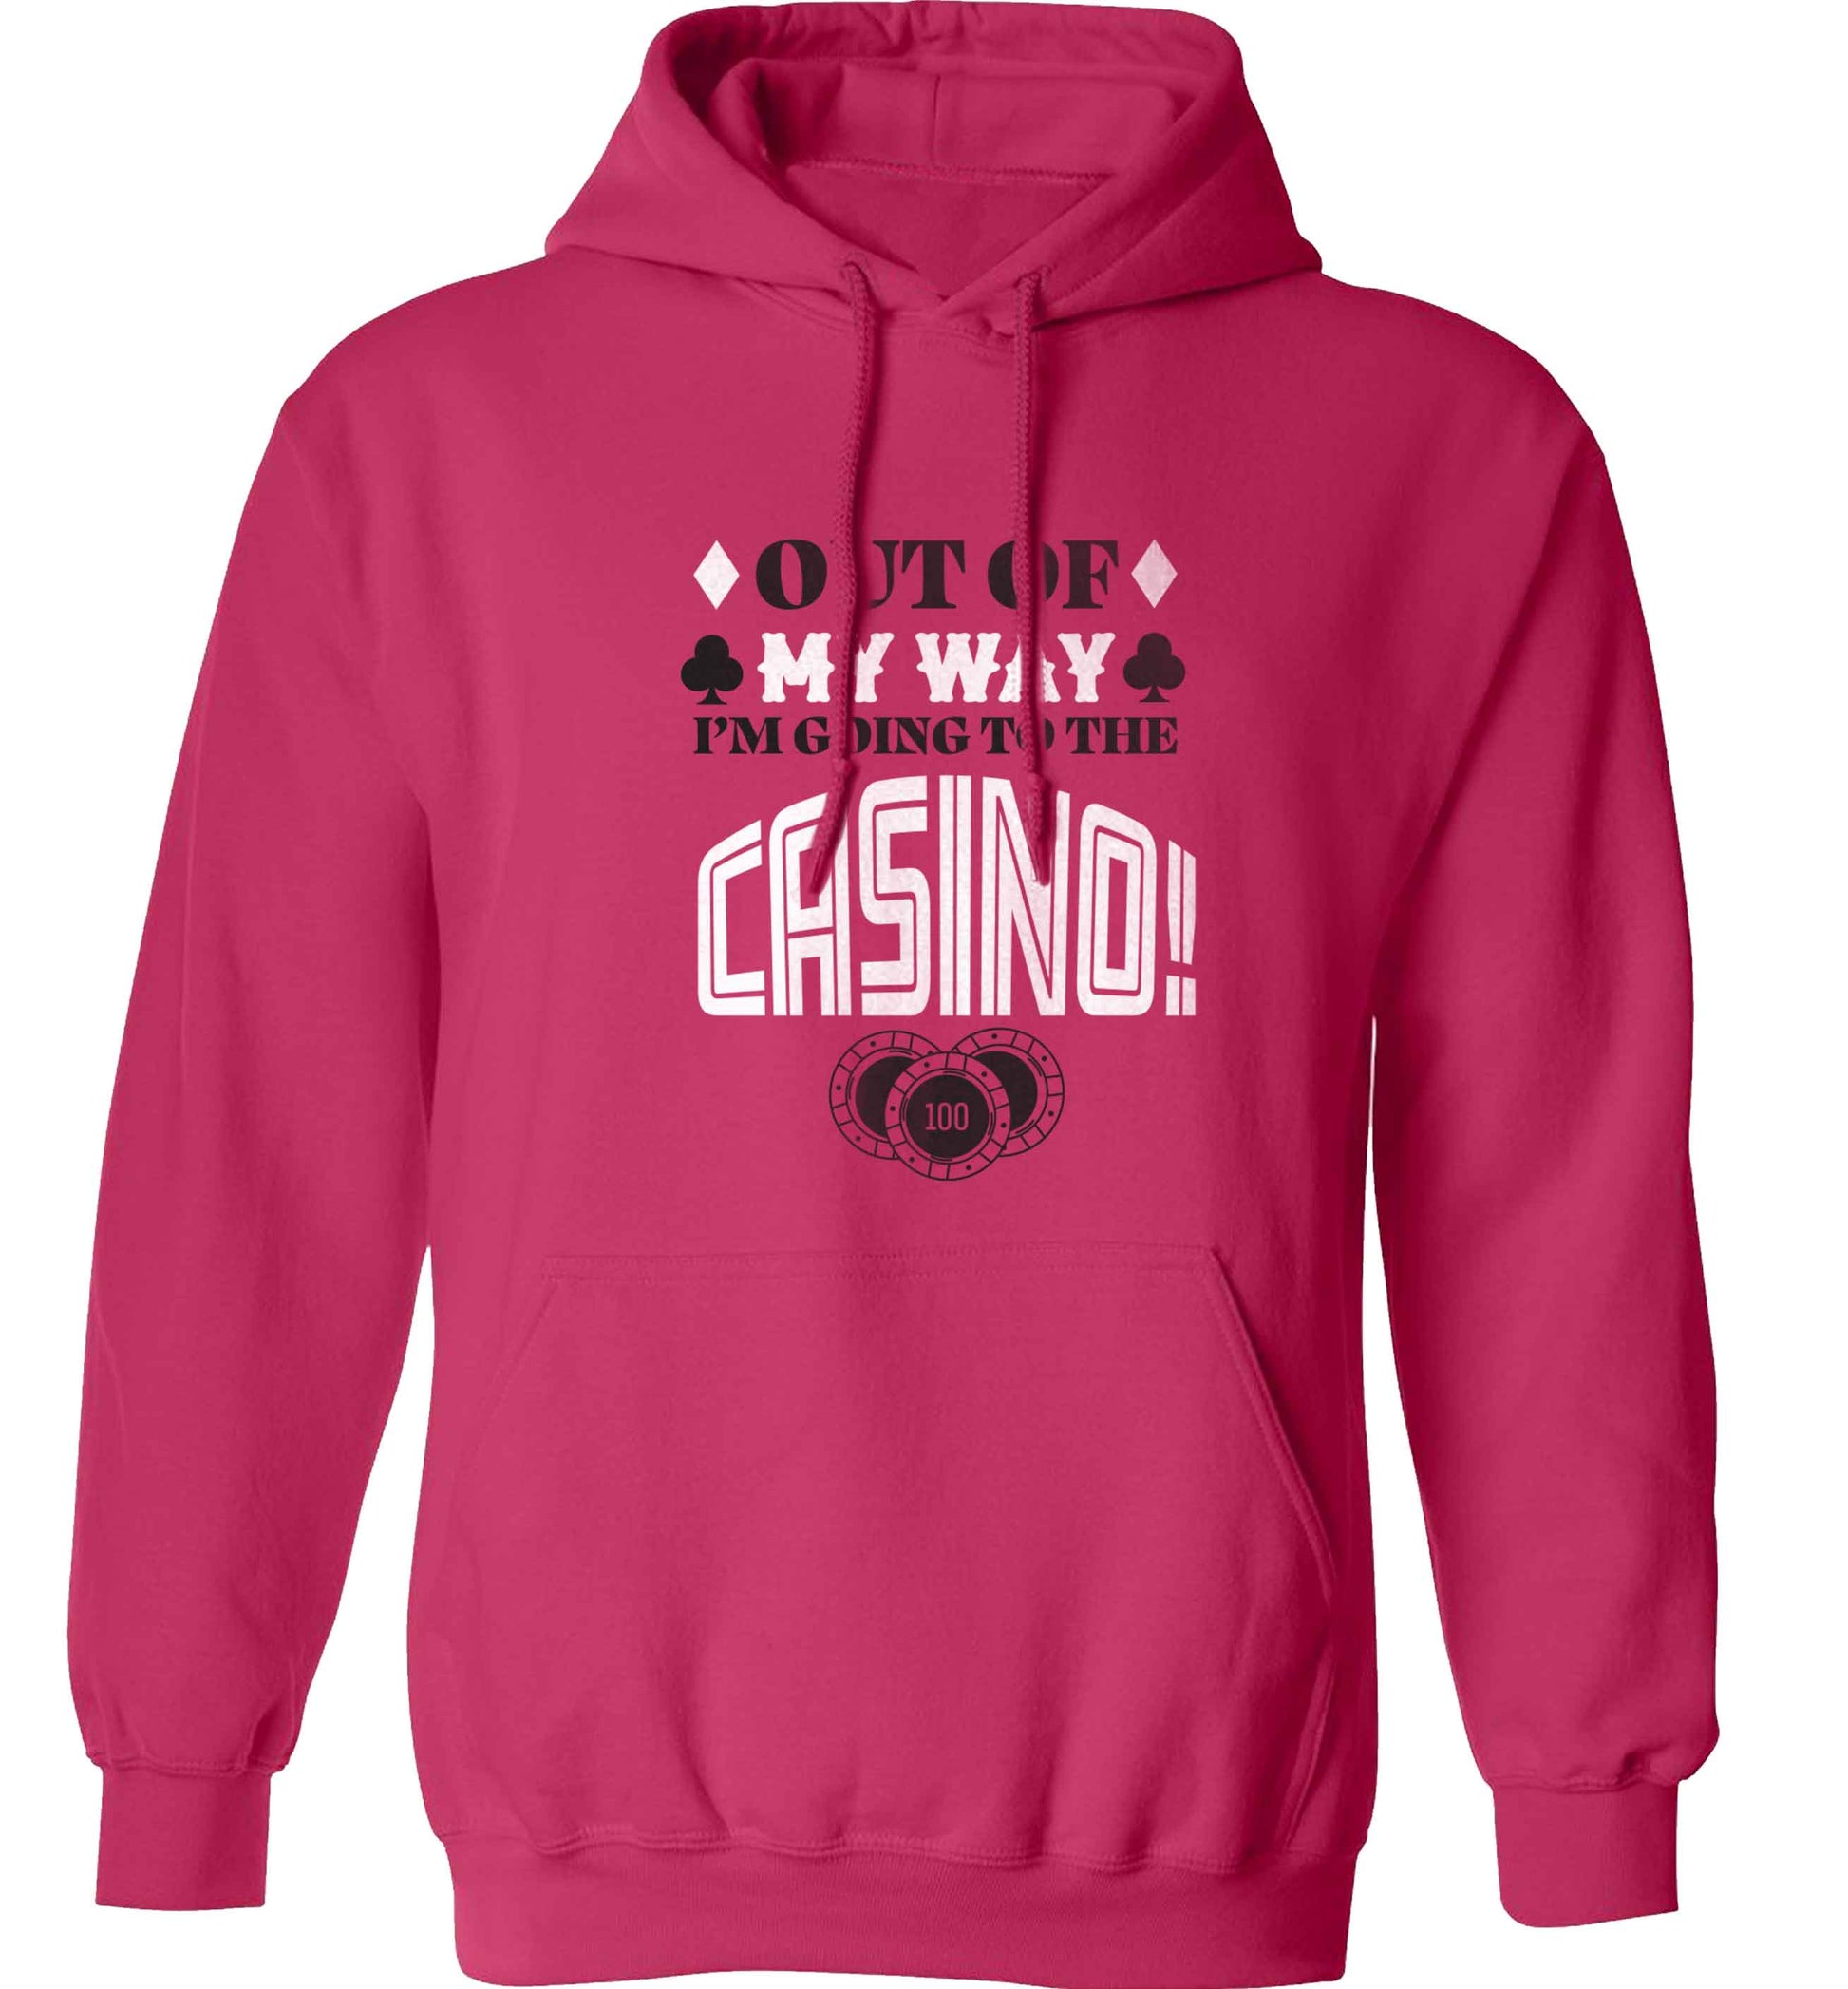 Out of my way I'm going to the casino adults unisex pink hoodie 2XL